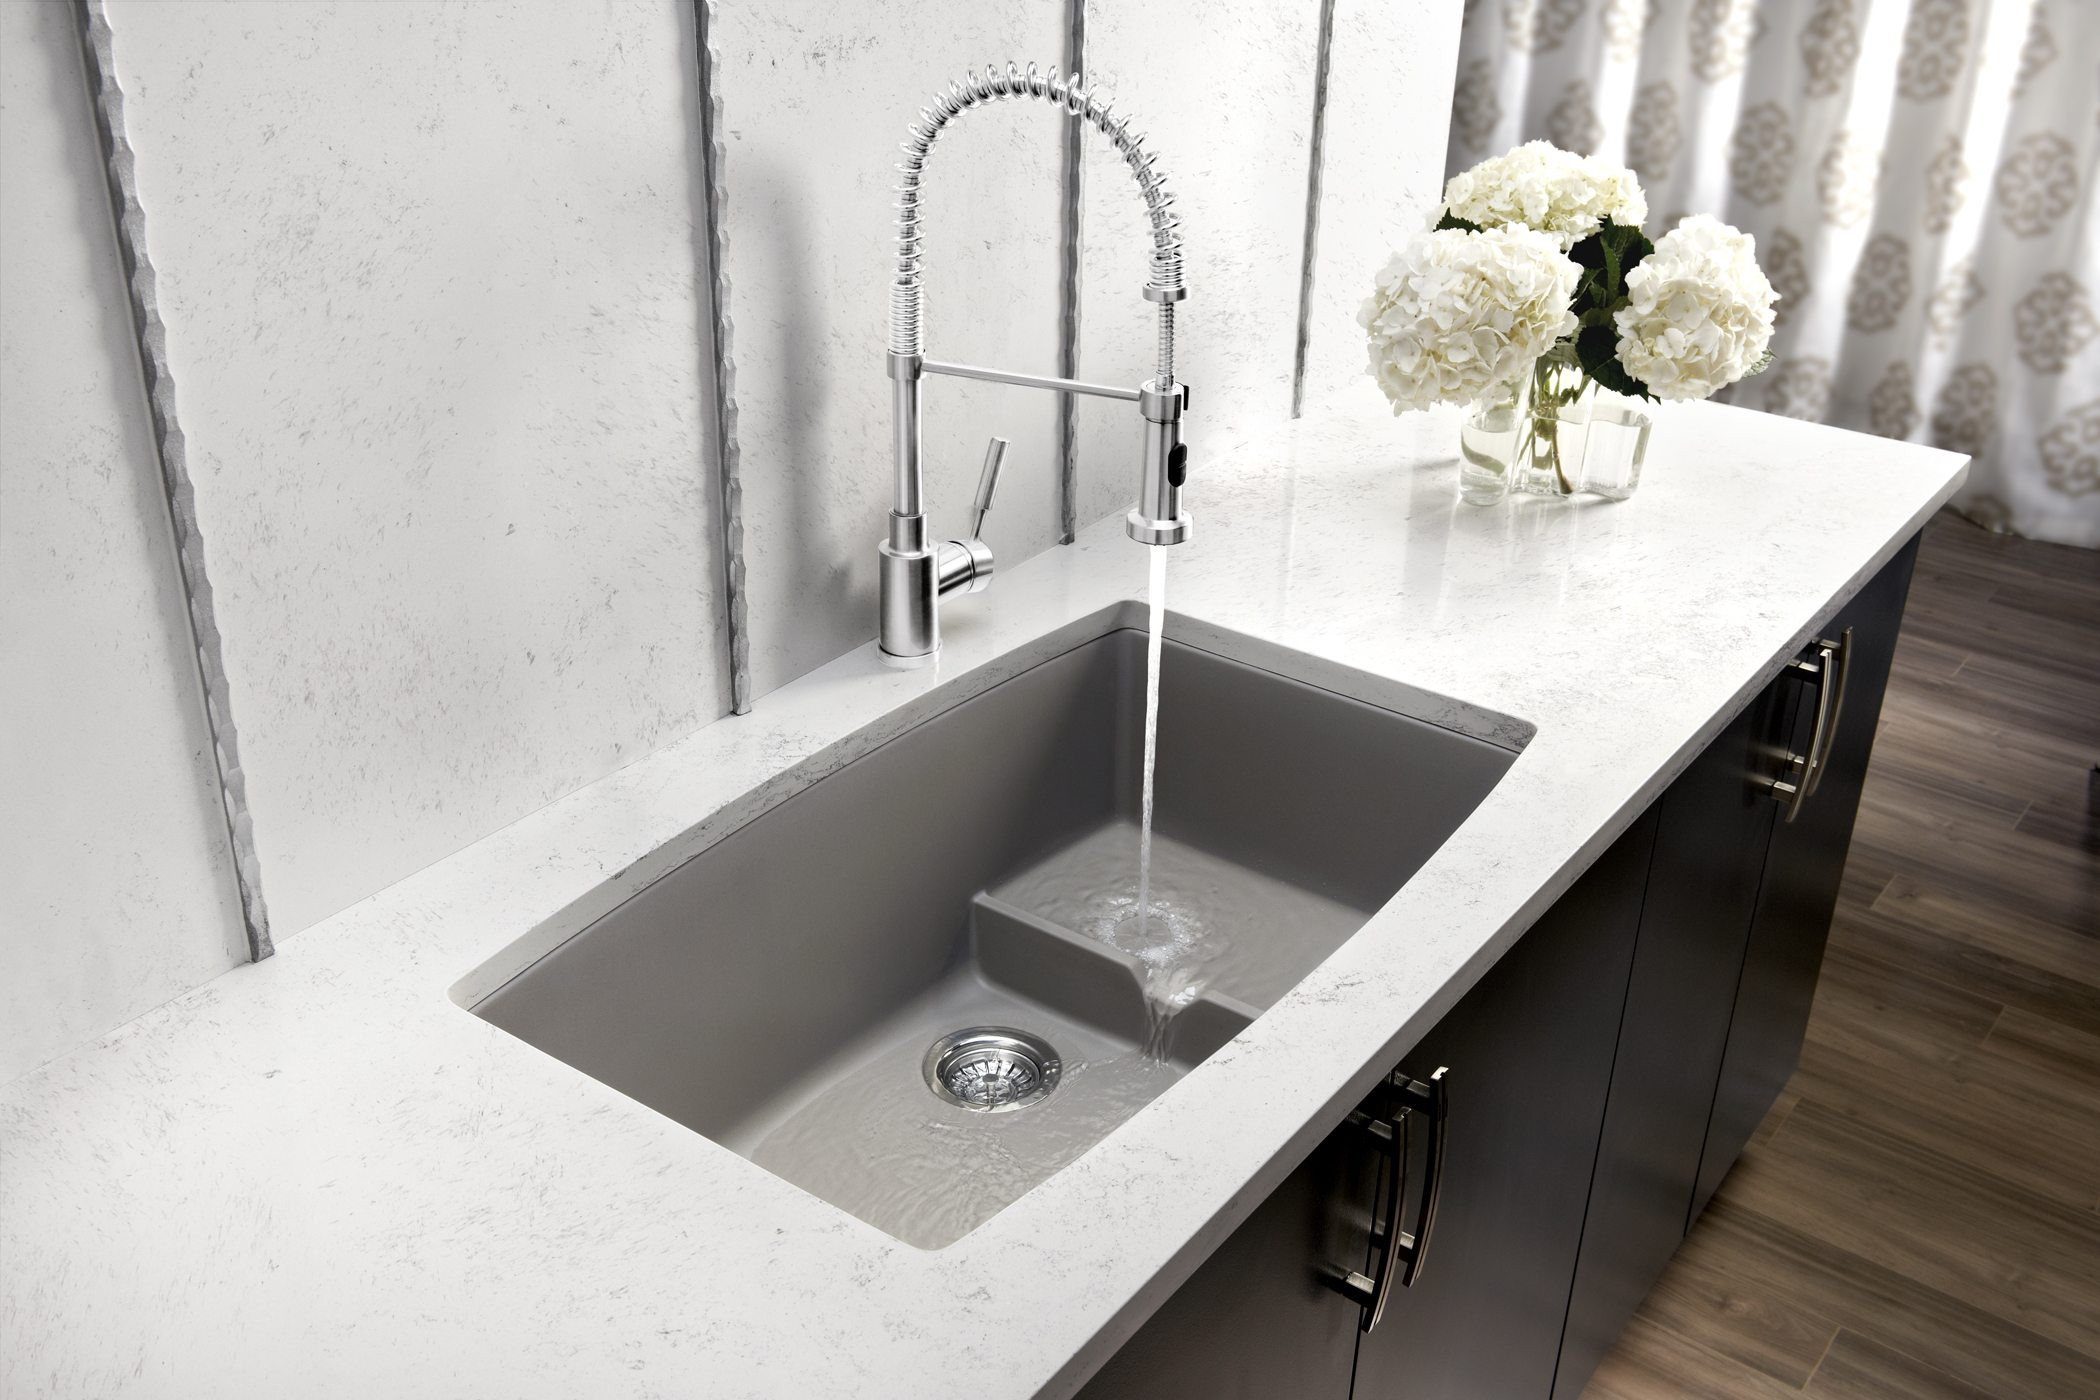 Modern Kitchen Sink Faucets
 Modern Kitchen Designs BLANCO Truffle Faucet and Sink